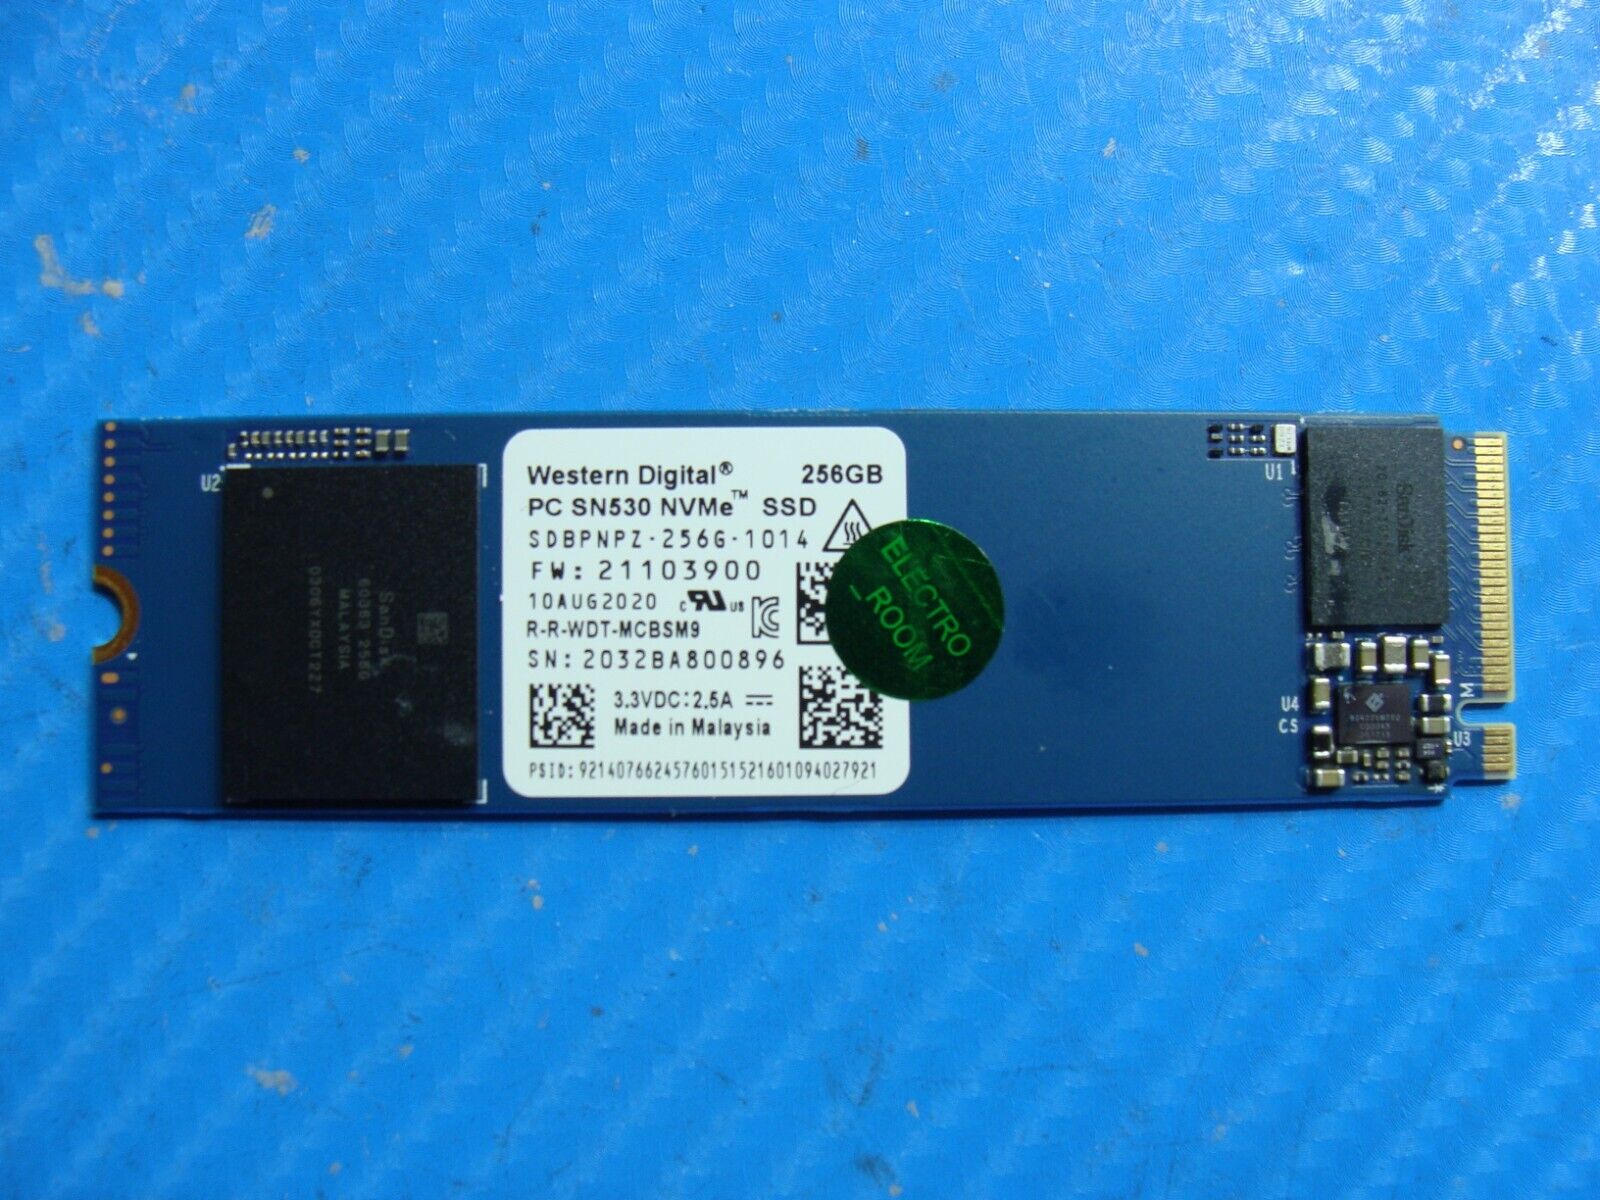 Acer AN515-55 WD NVMe M.2 256GB SSD Solid State Drive SDBPNPZ-256G-1014